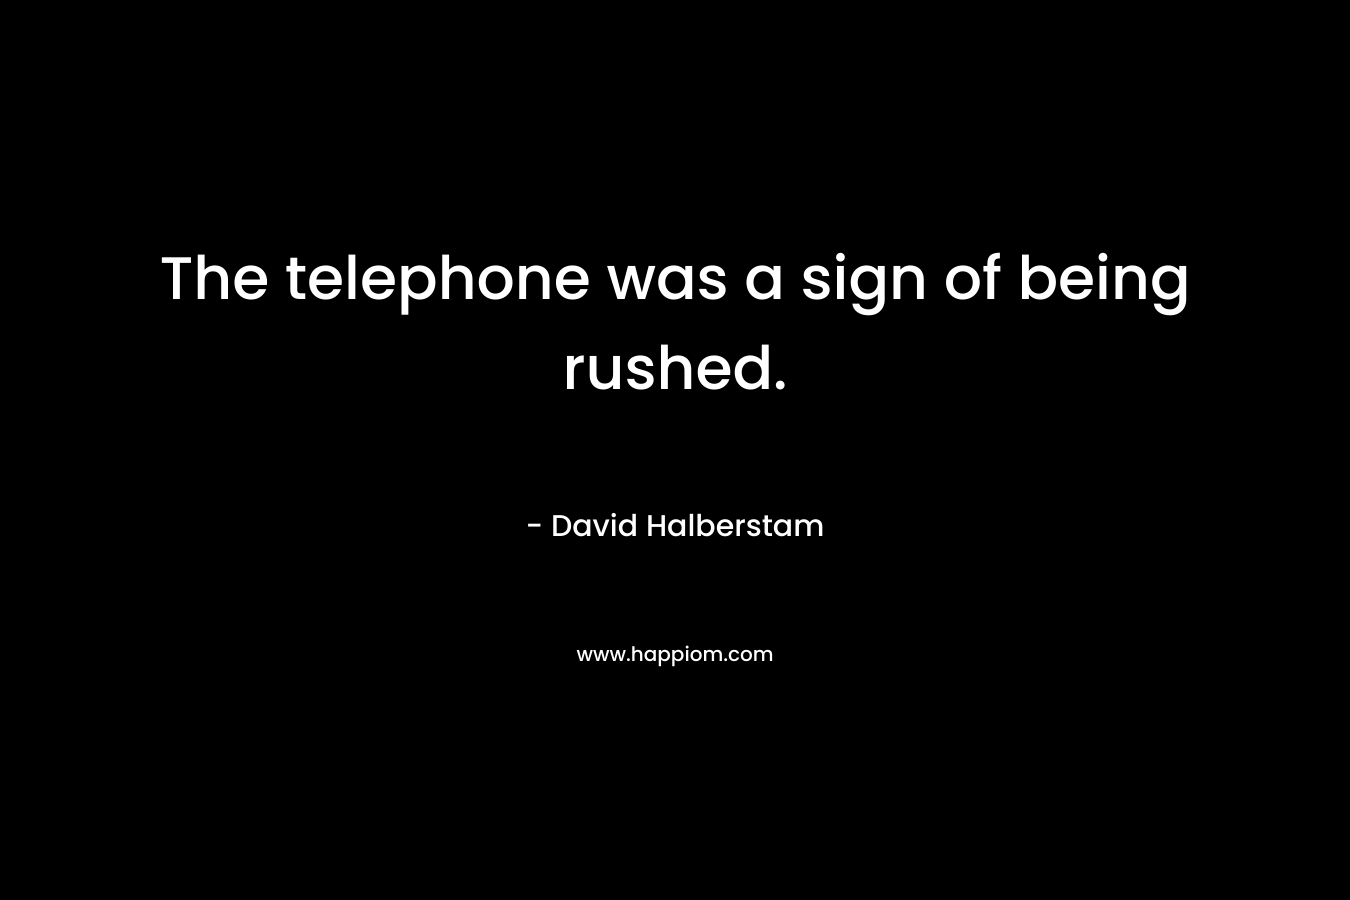 The telephone was a sign of being rushed. – David Halberstam